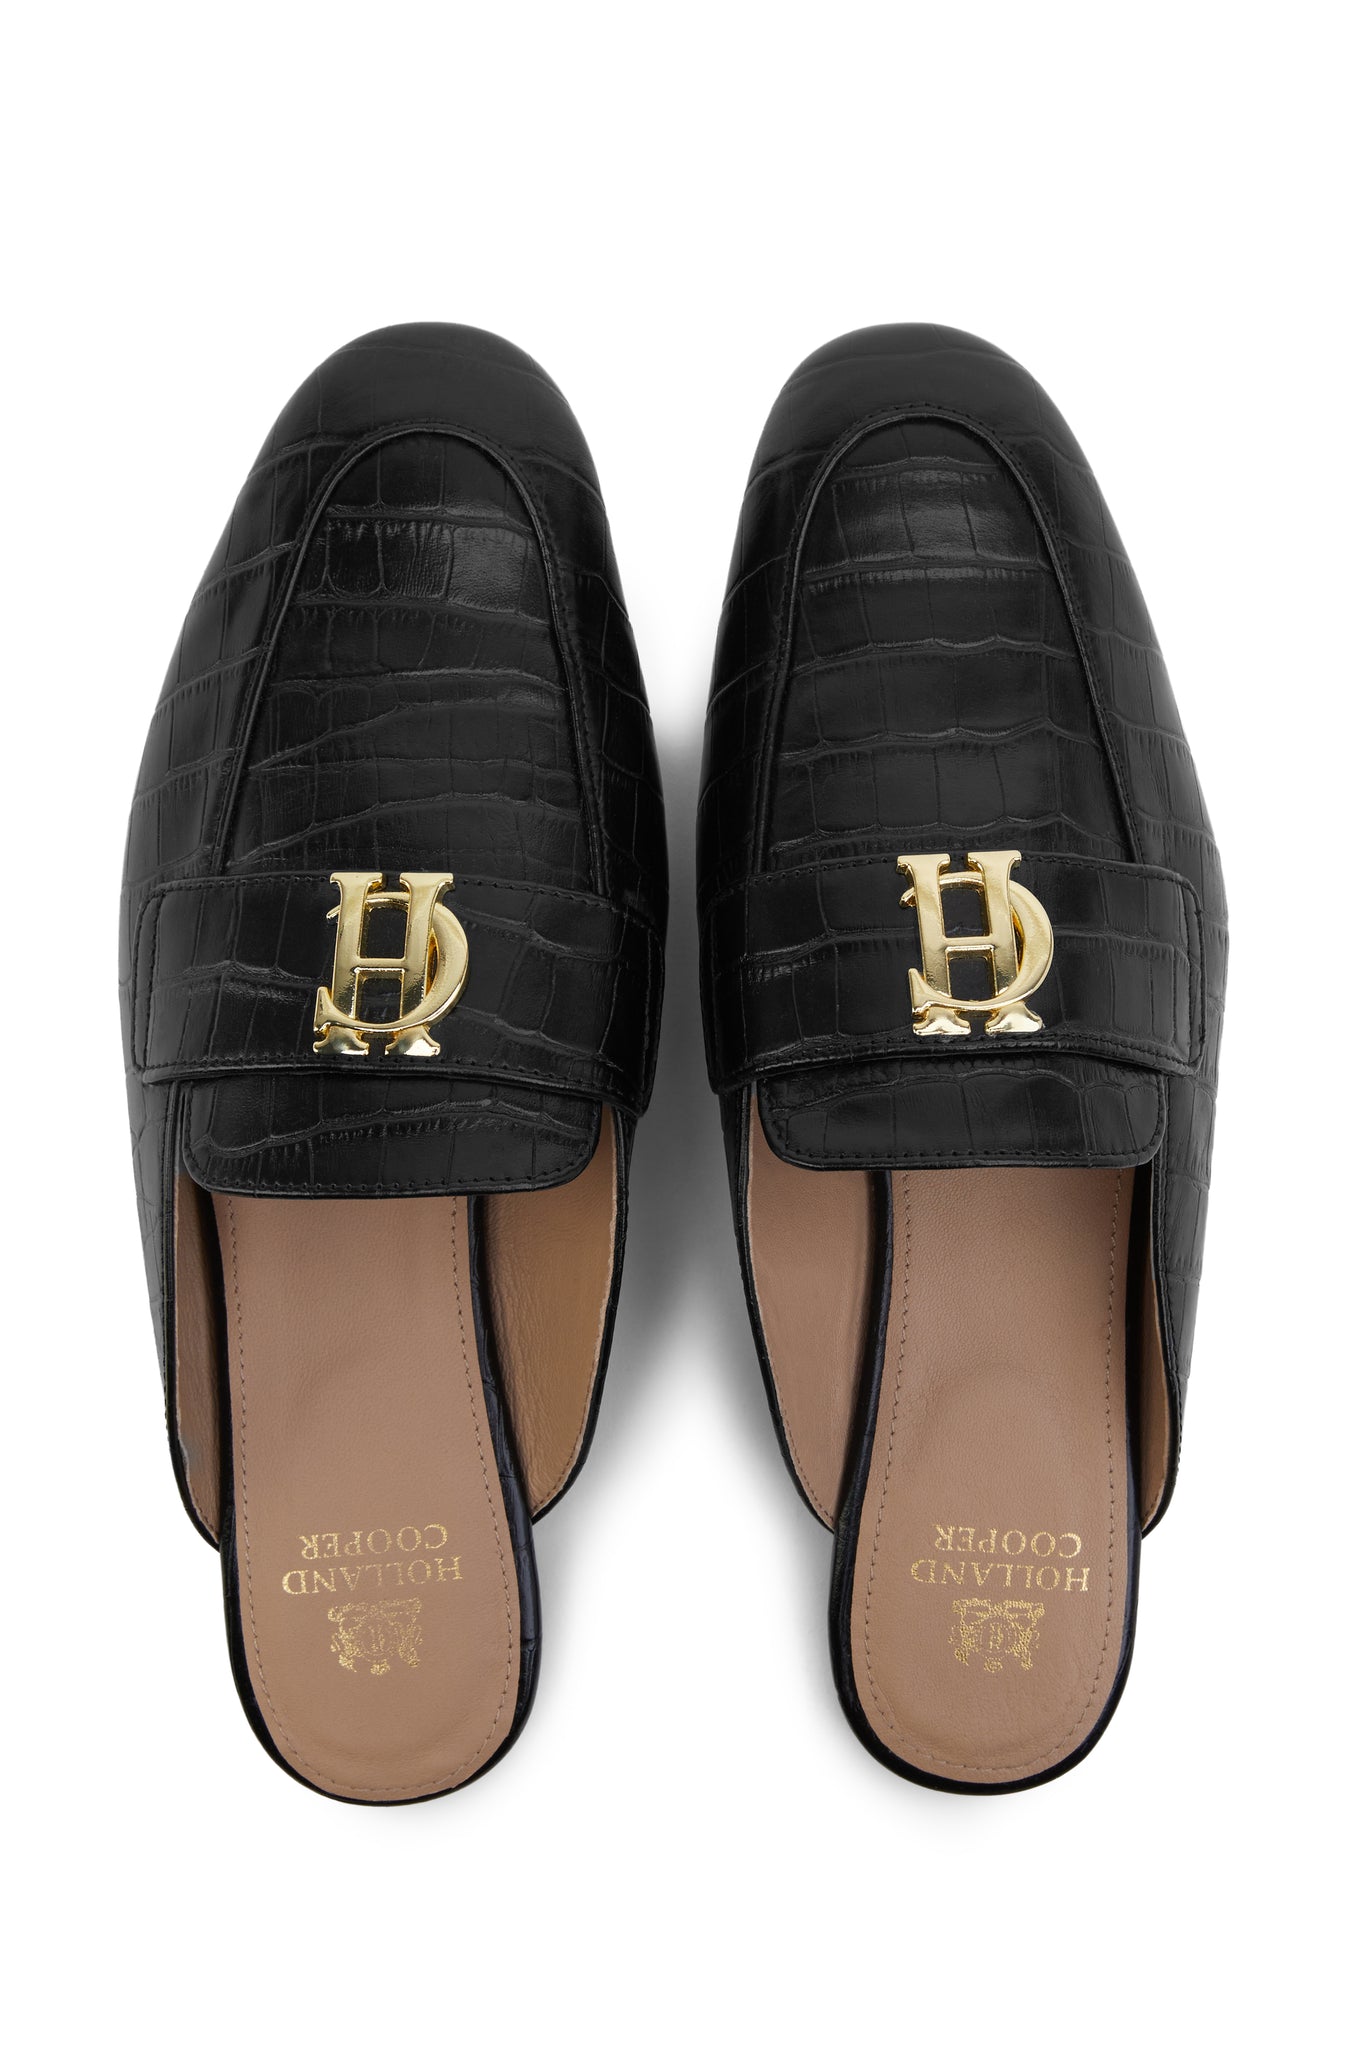 Birds eye view of black croc embossed leather backless loafers with a slightly pointed toe and gold hardware to the top with gold foil branding to the inner sole